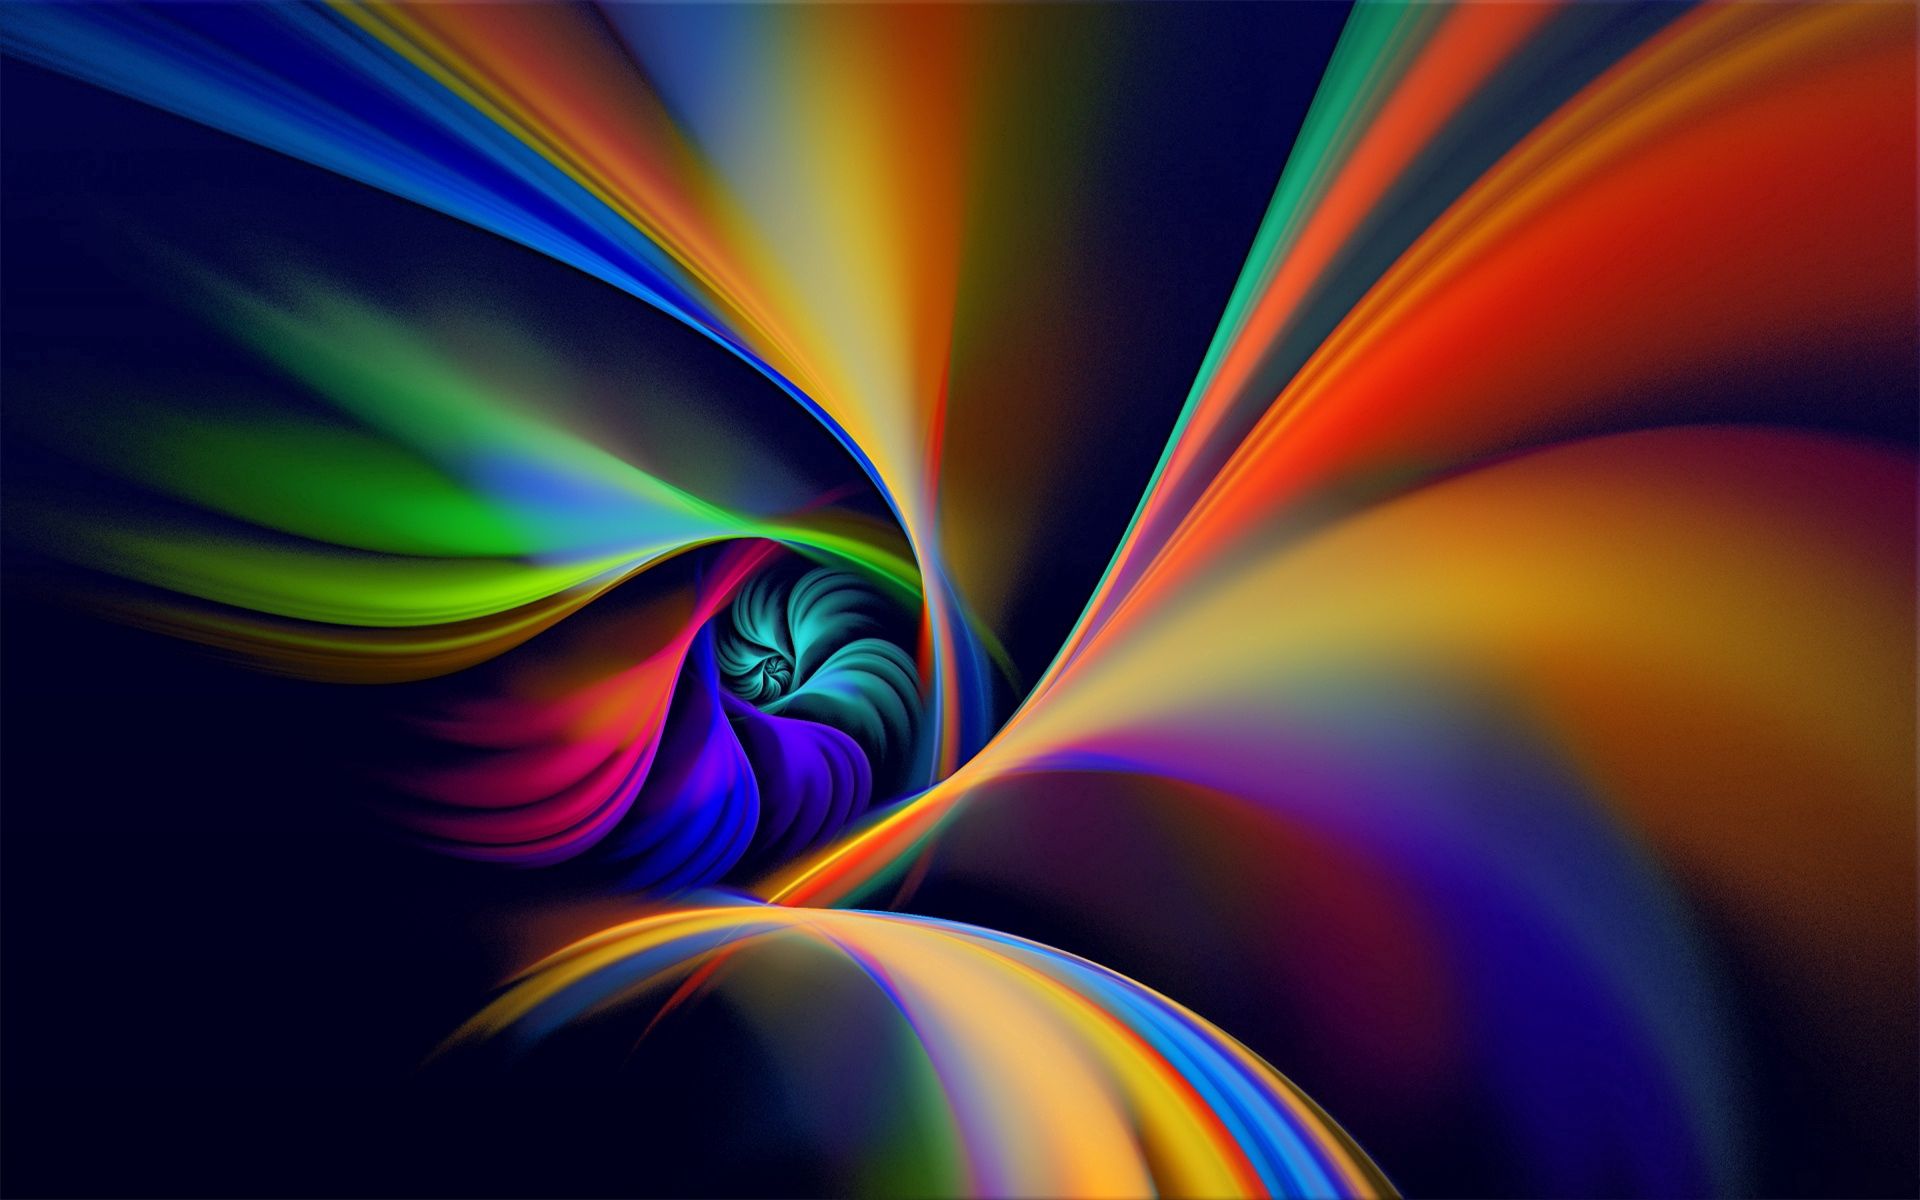 rotation, multicolored, abstract, motley, lines, spiral iphone wallpaper